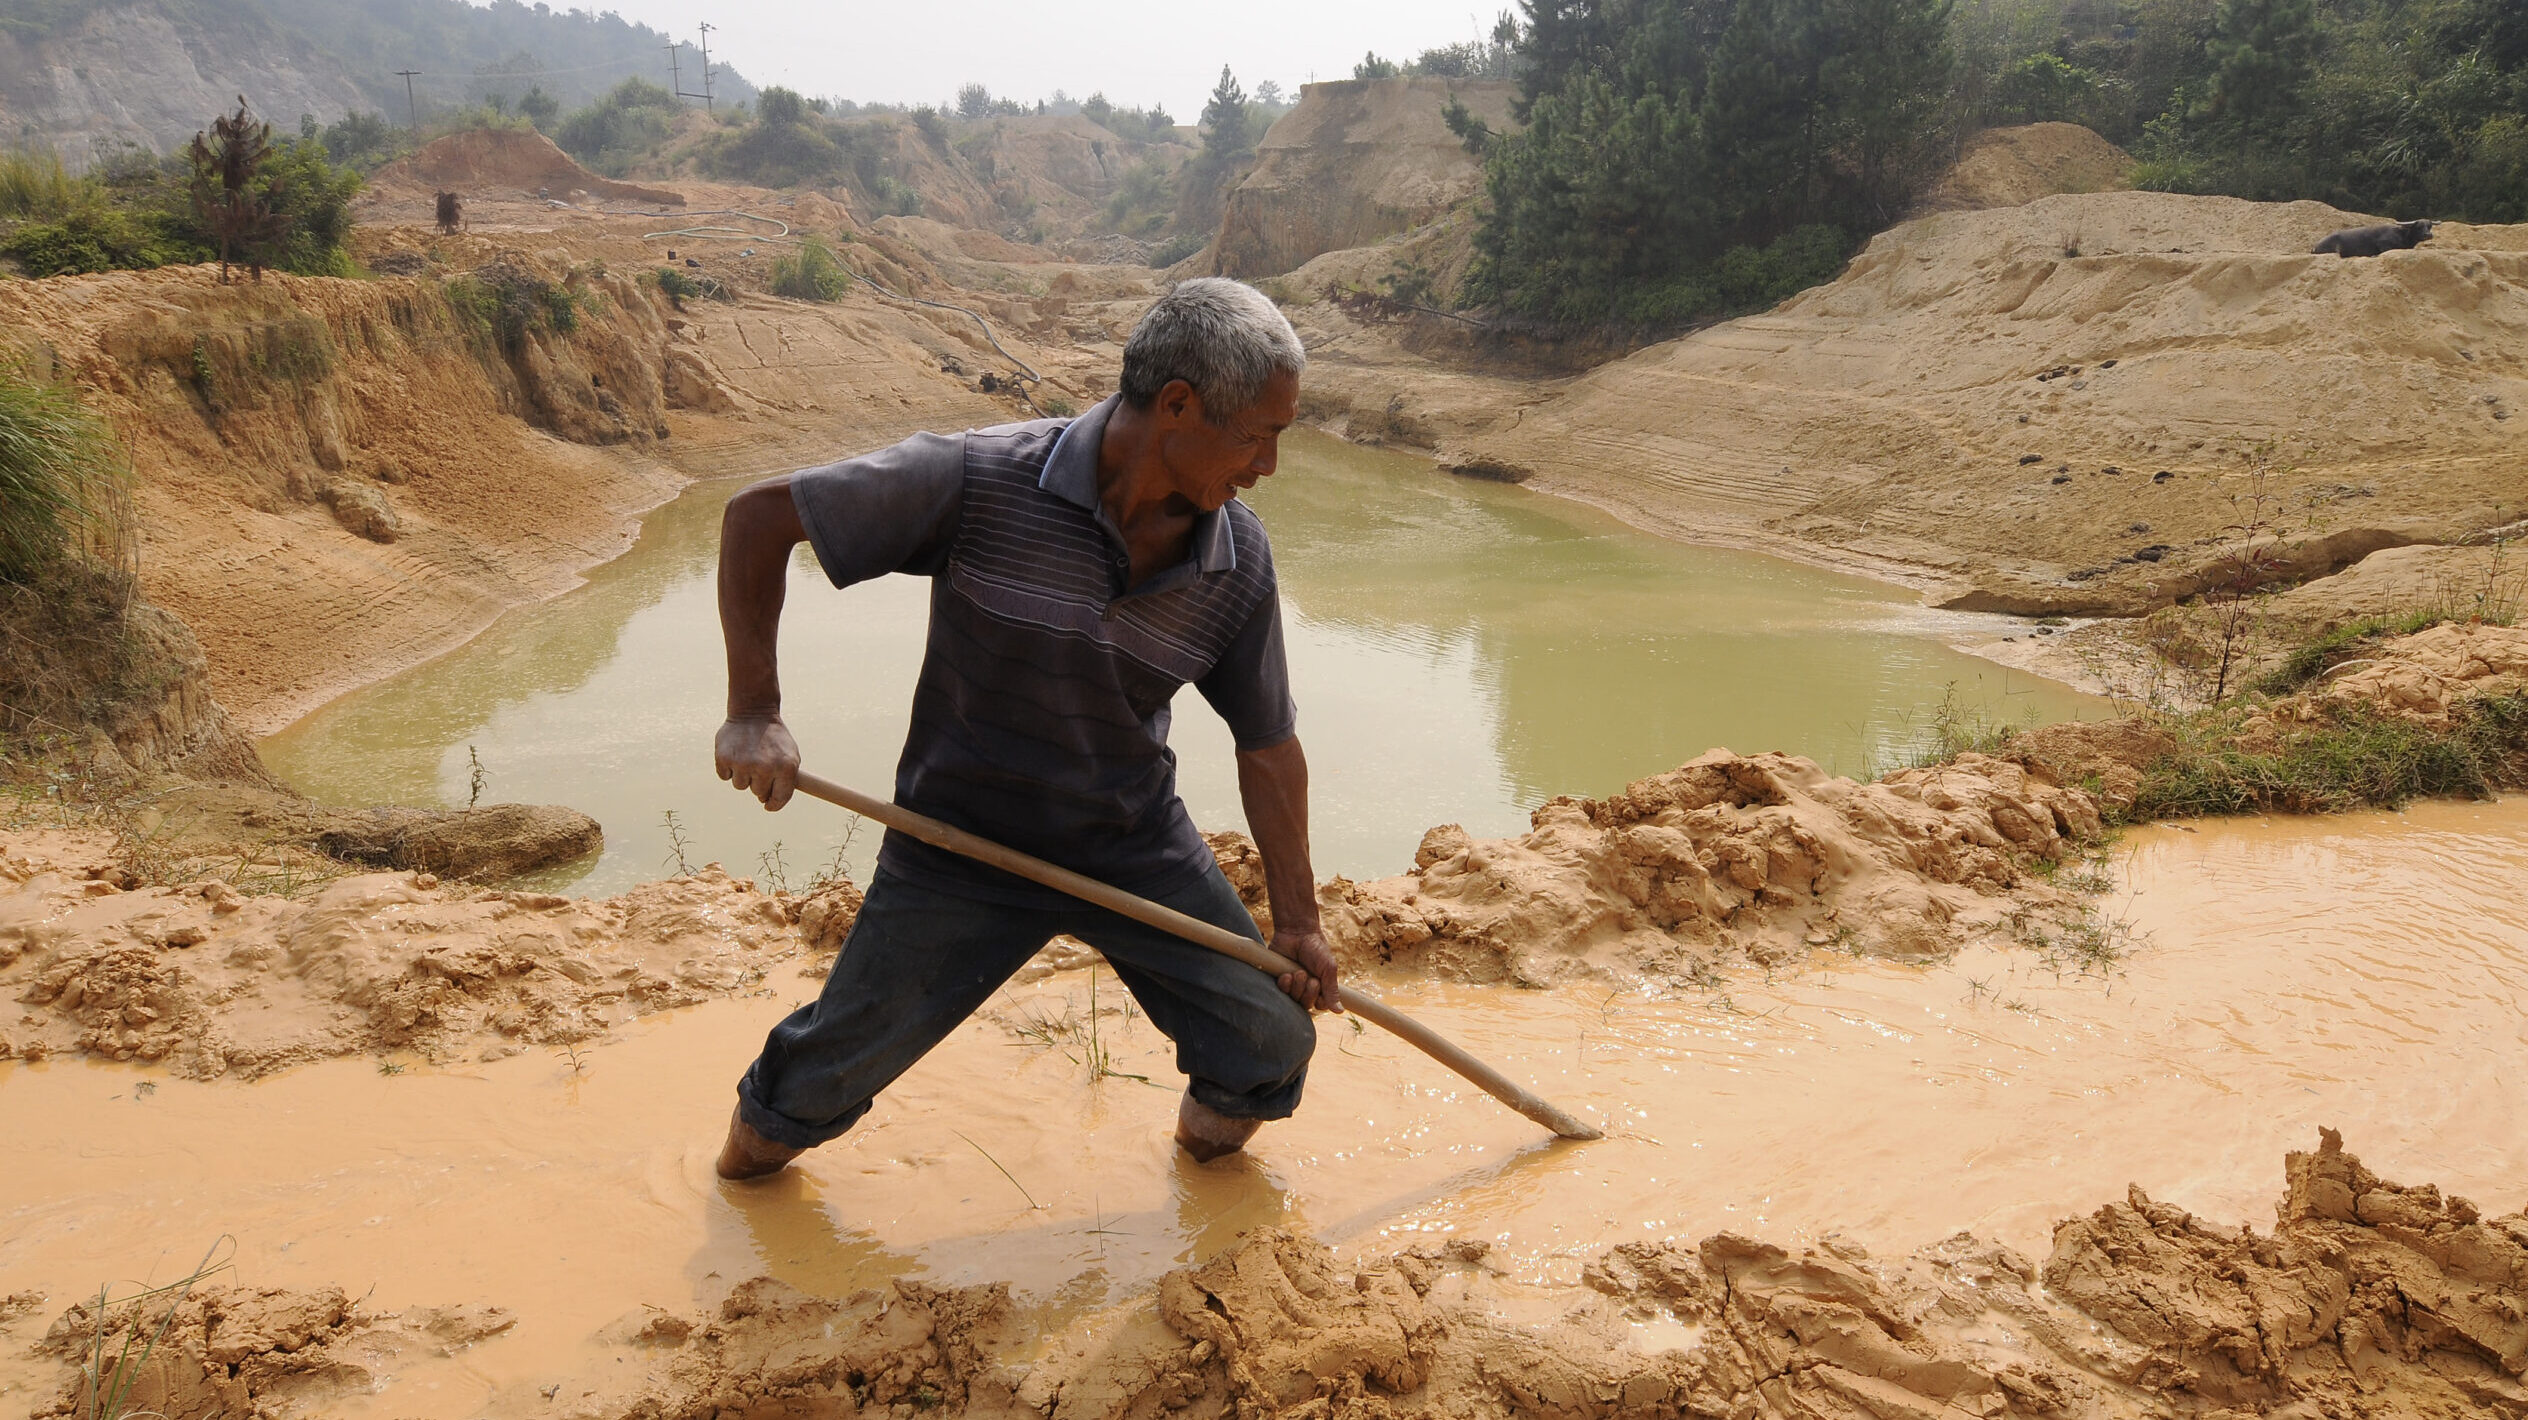 A labourer works at the site of a rare earth metals mine at Nancheng county, Jiangxi province china